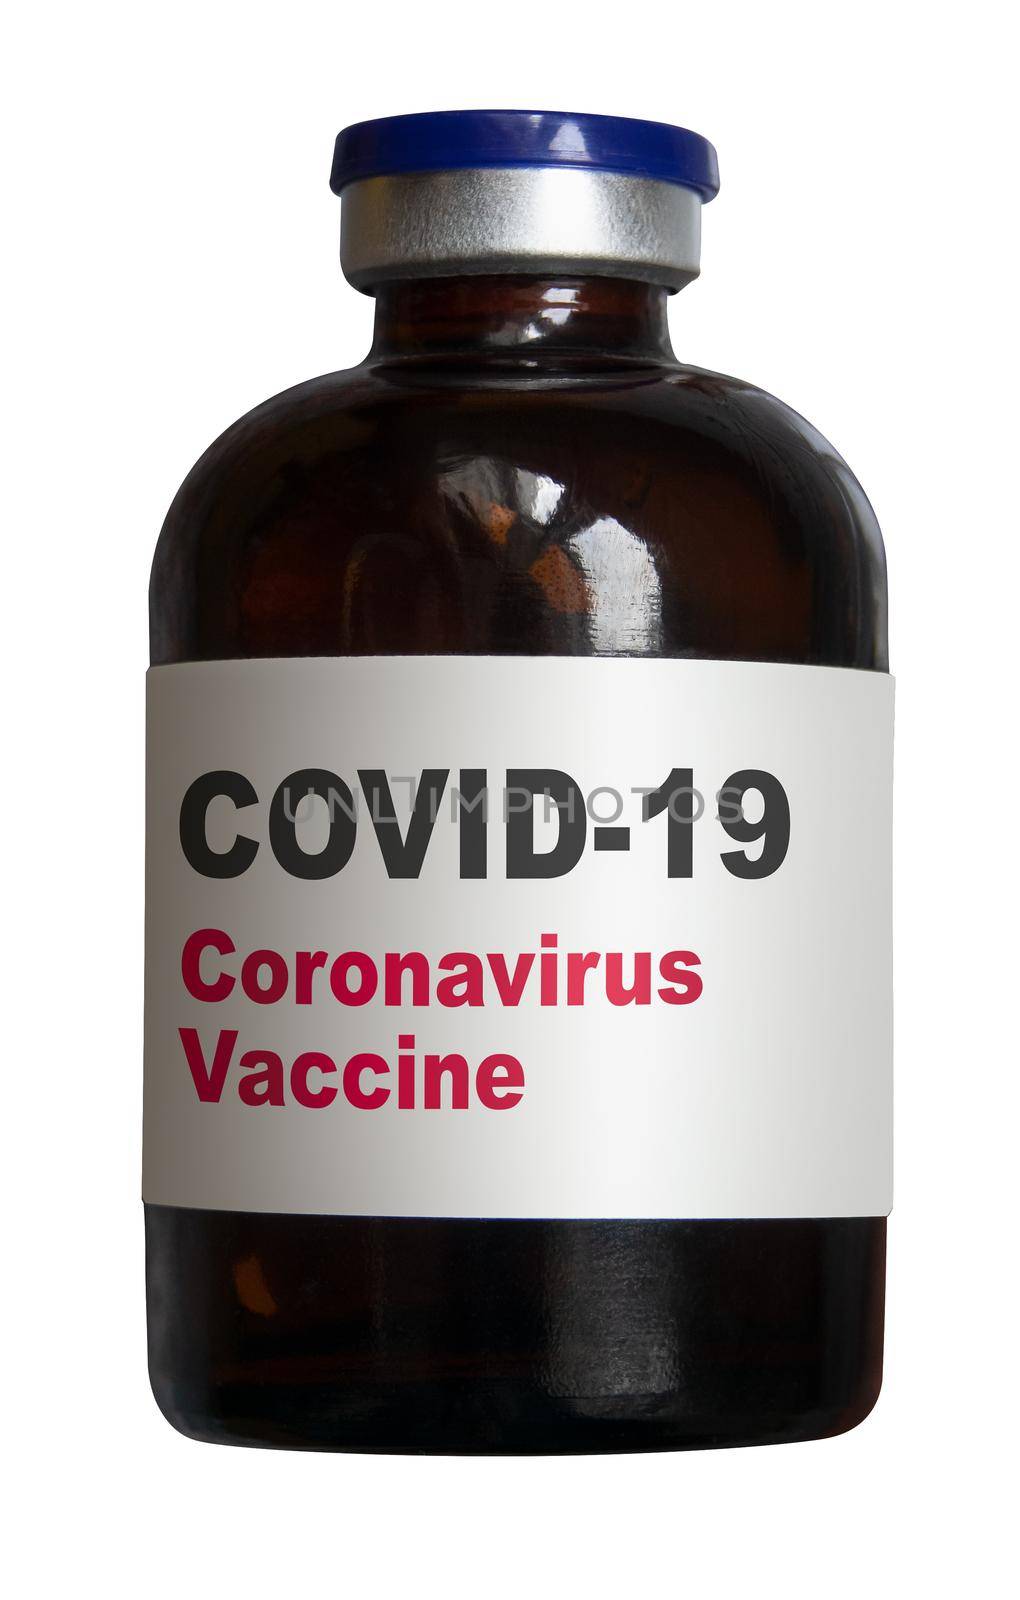 A Bottle Or Vial Containing A Vaccine For Coronavirus Or COVID-19, On A White Background